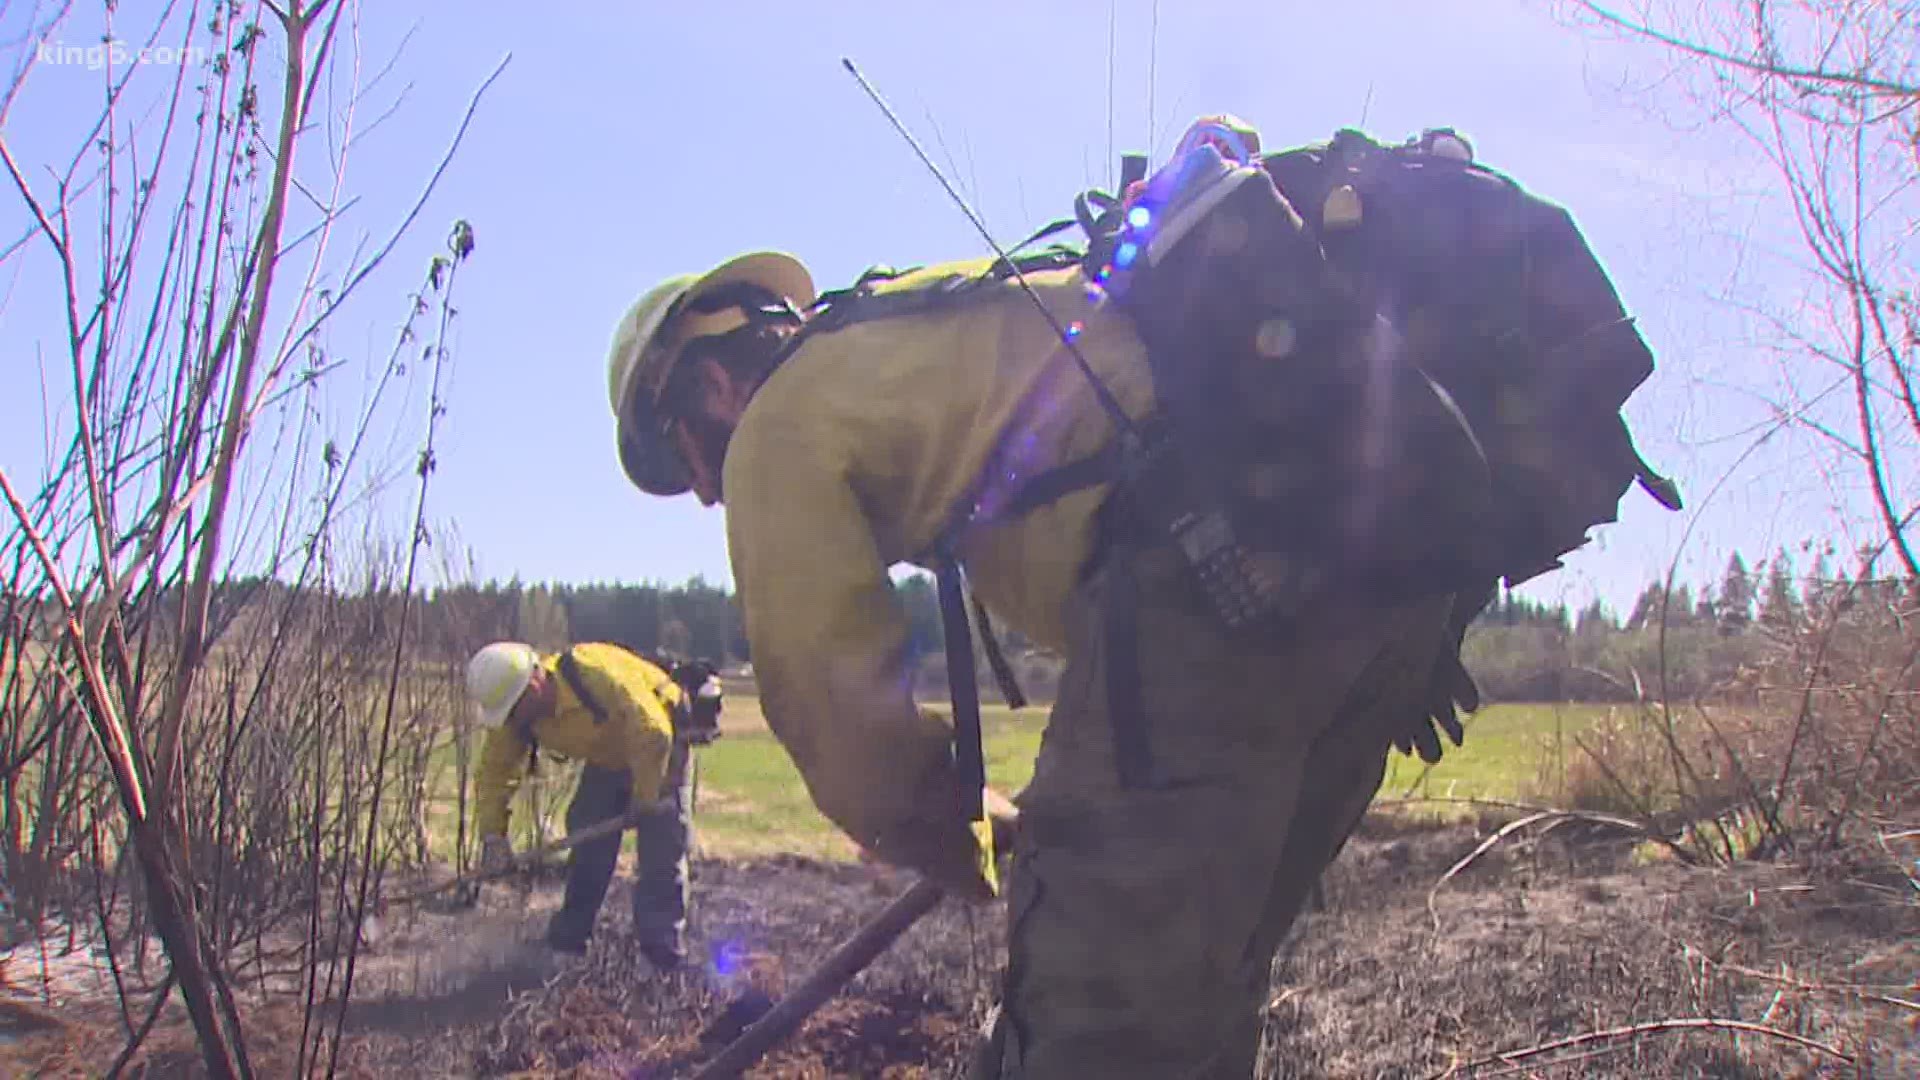 Washington state is gearing up for a new challenge this year – fighting wildfires in the time of coronavirus.